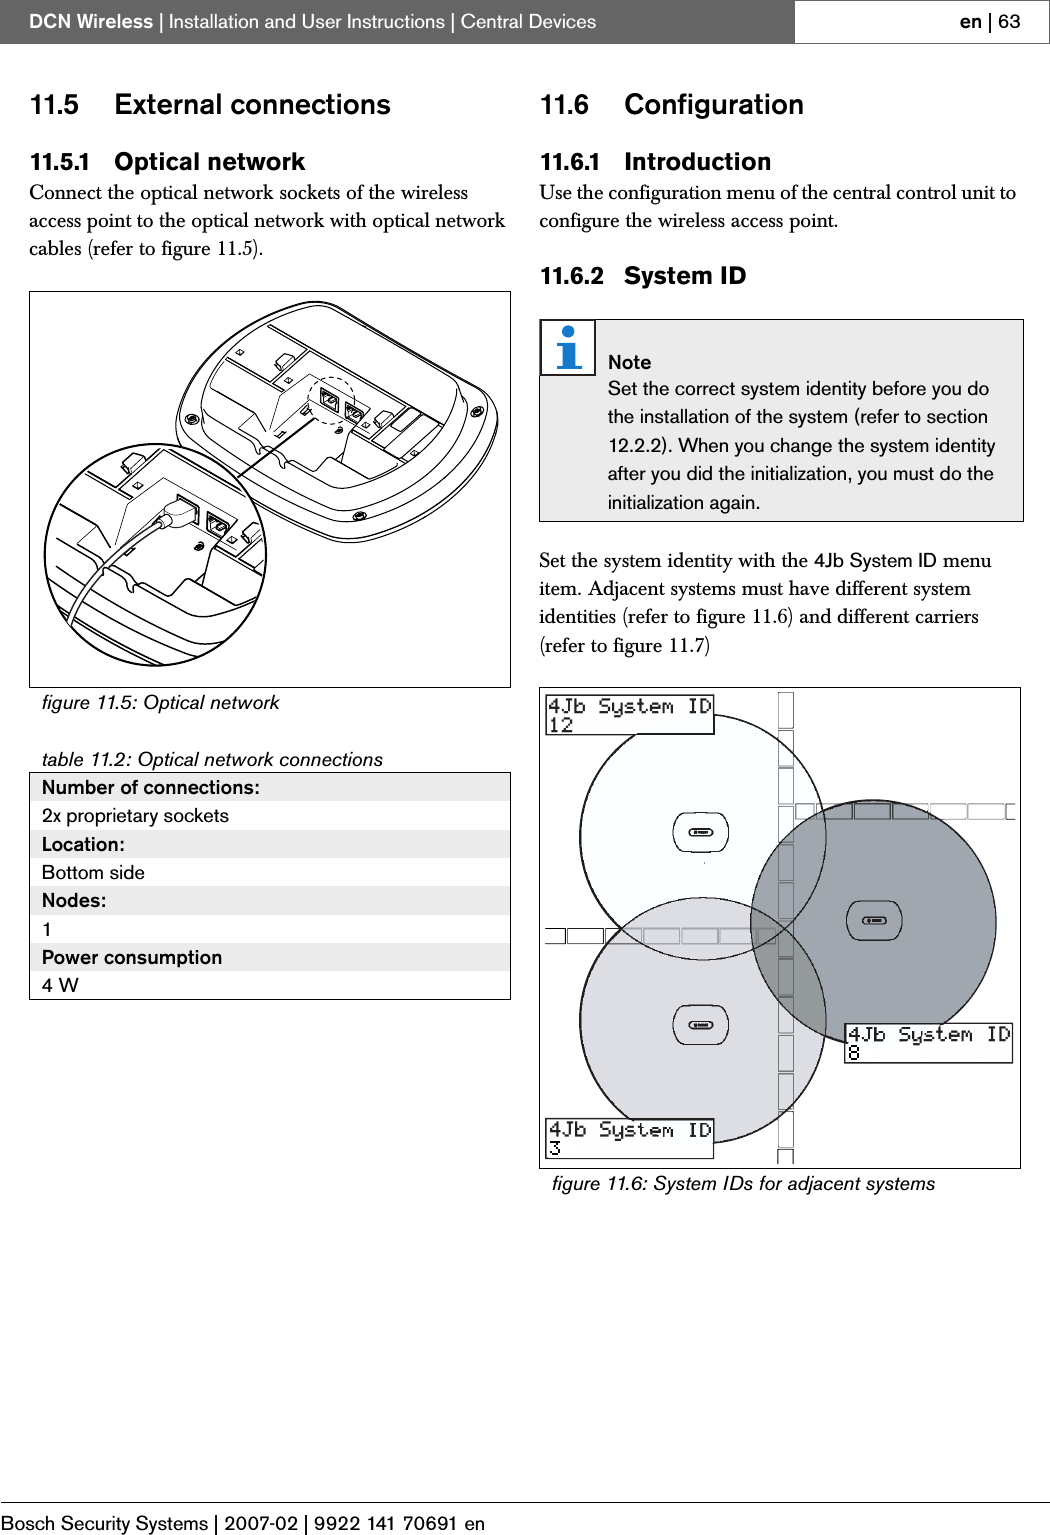 Page 34 of Bosch Security Systems DCNWAP Wireless Access Point User Manual Part 2